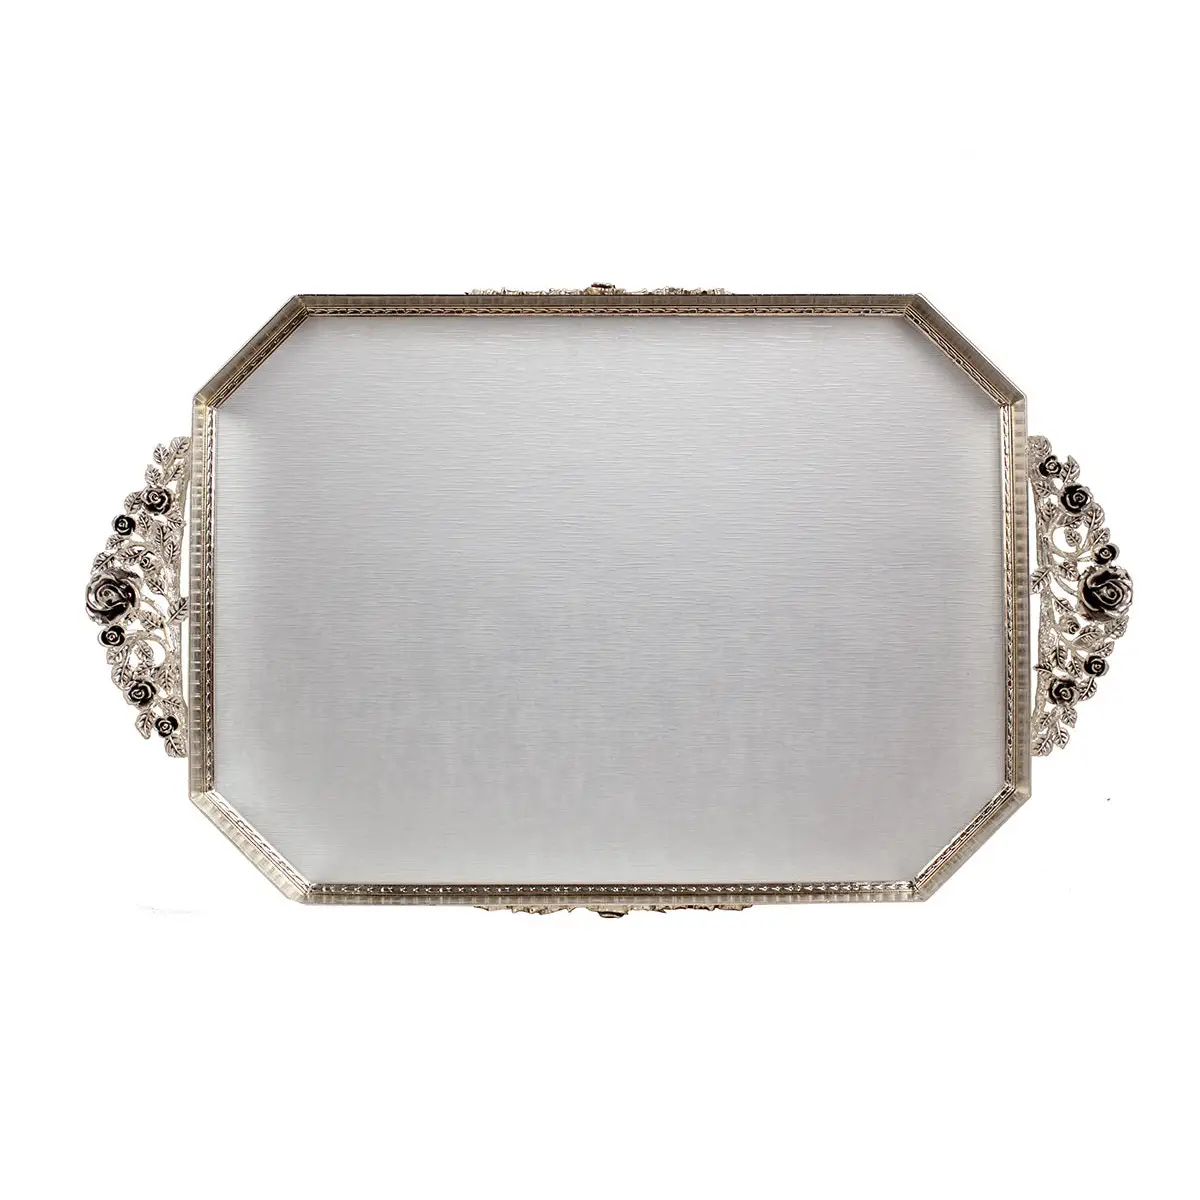 SILVER PLATED TRAY ROSE DESIGN - ROSE COLLECTION